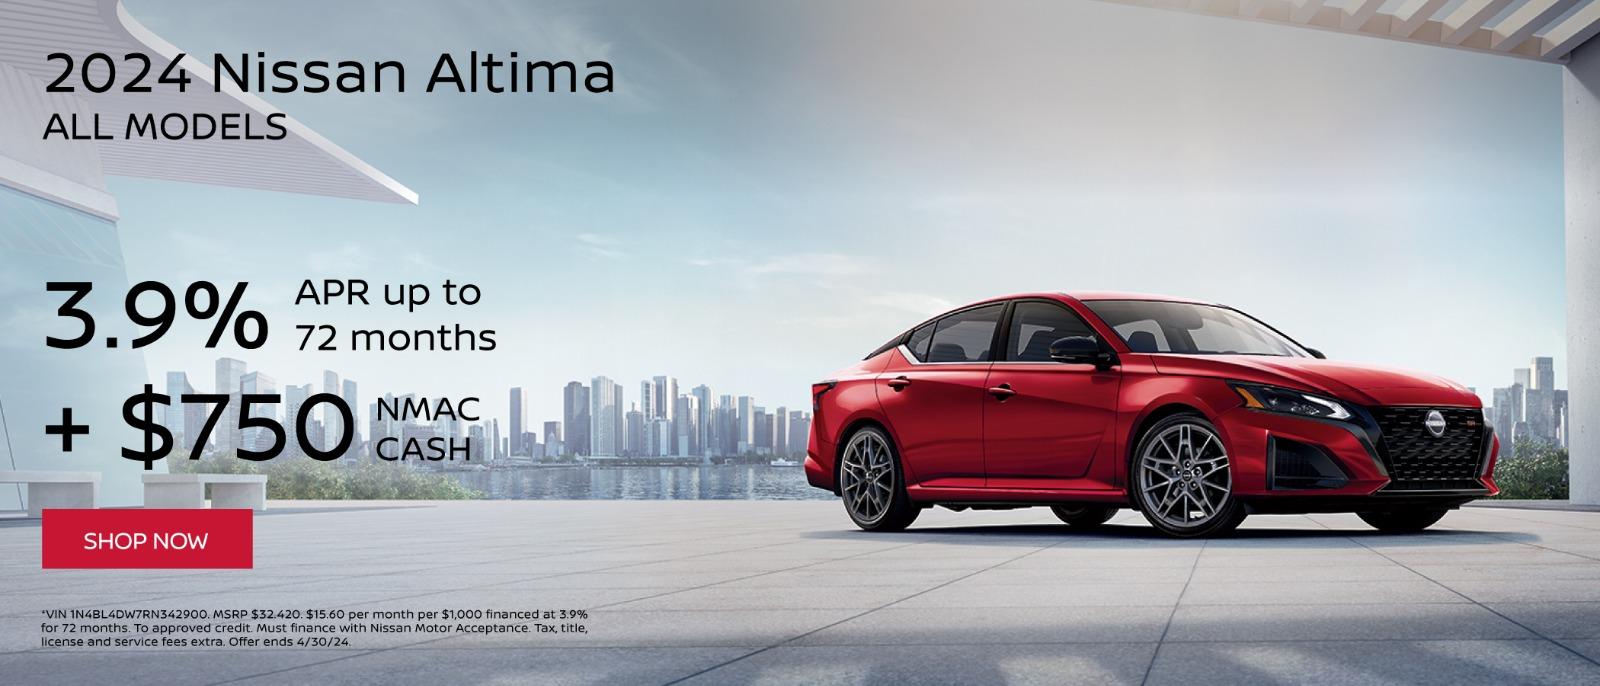 All New 2024 Nissan Altima 3.9% Apr up to 72 months